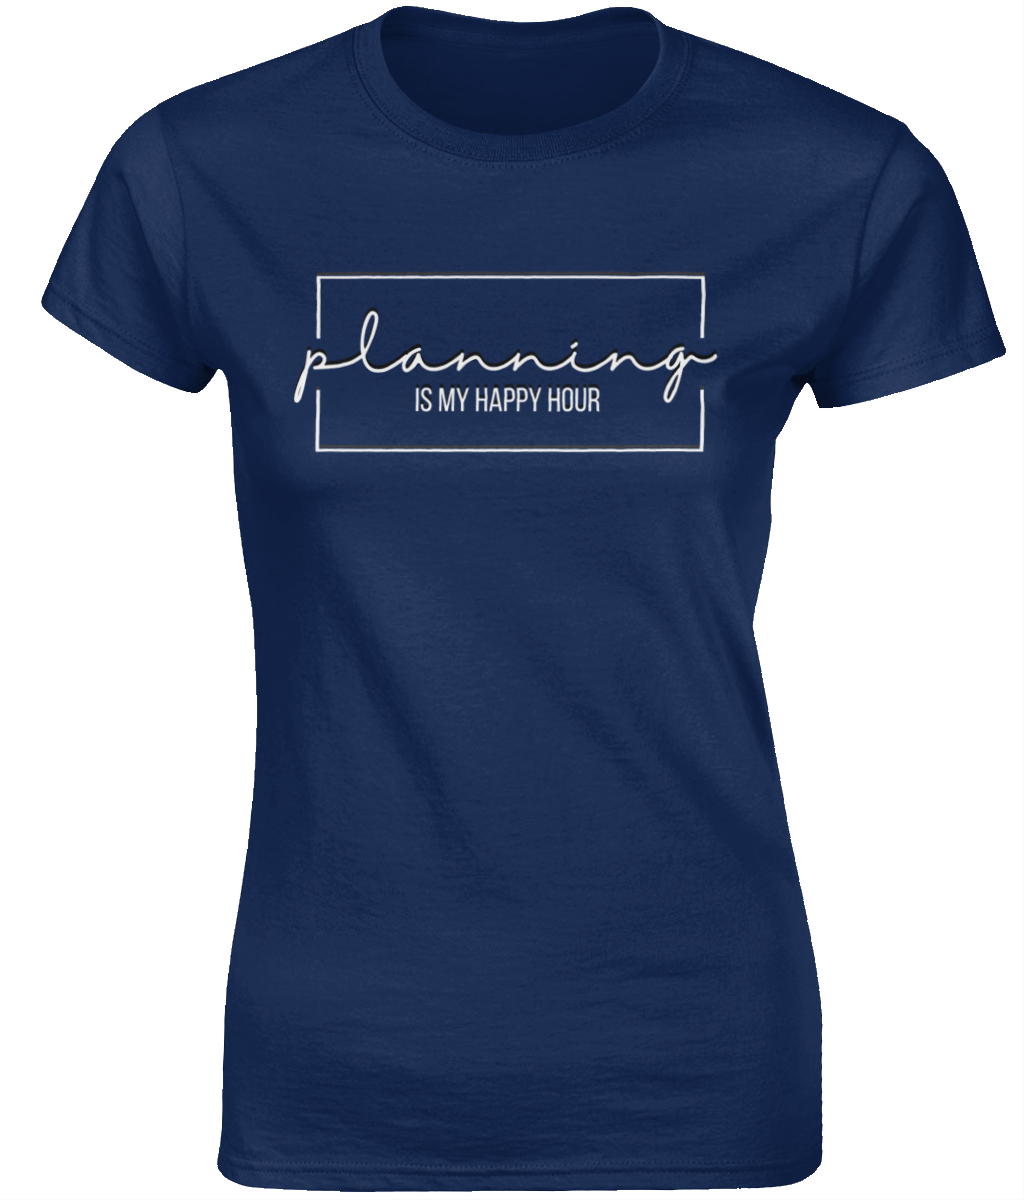 Planning Is My Happy Hour | Gildan SoftStyle® Ladies Fitted Ringspun T-Shirt.